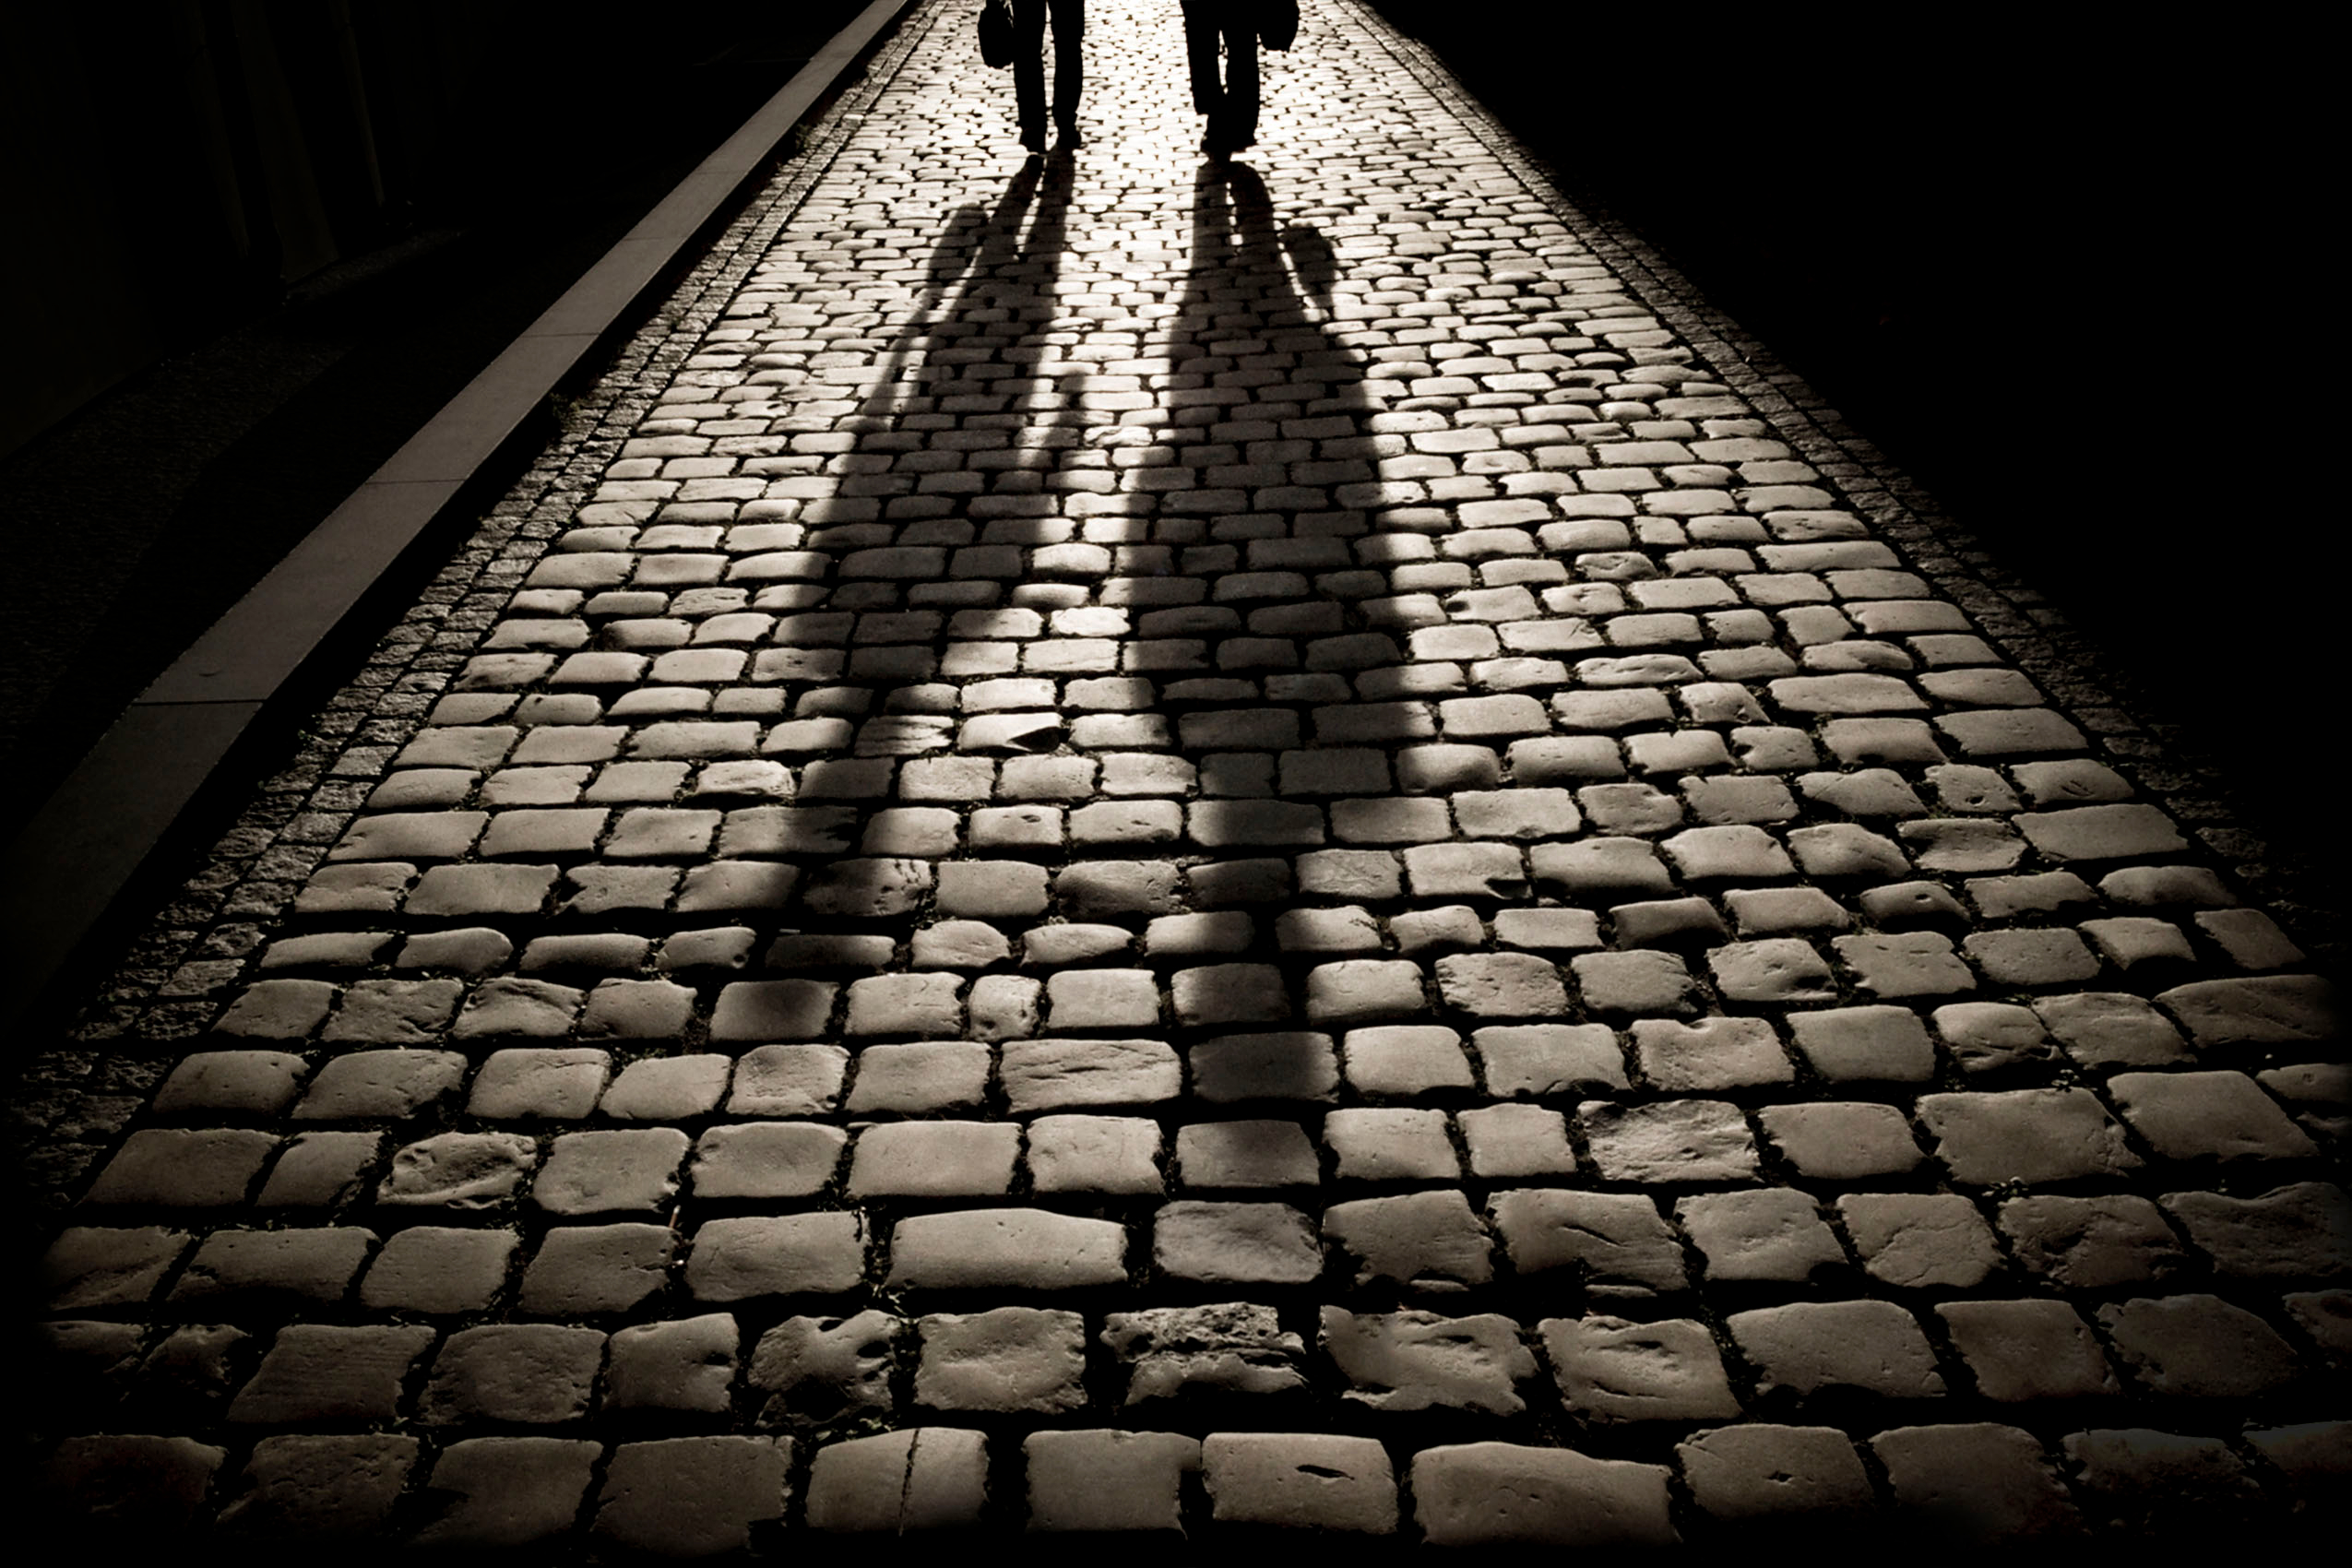 Two men walking on the pavement | Source: Shutterstock